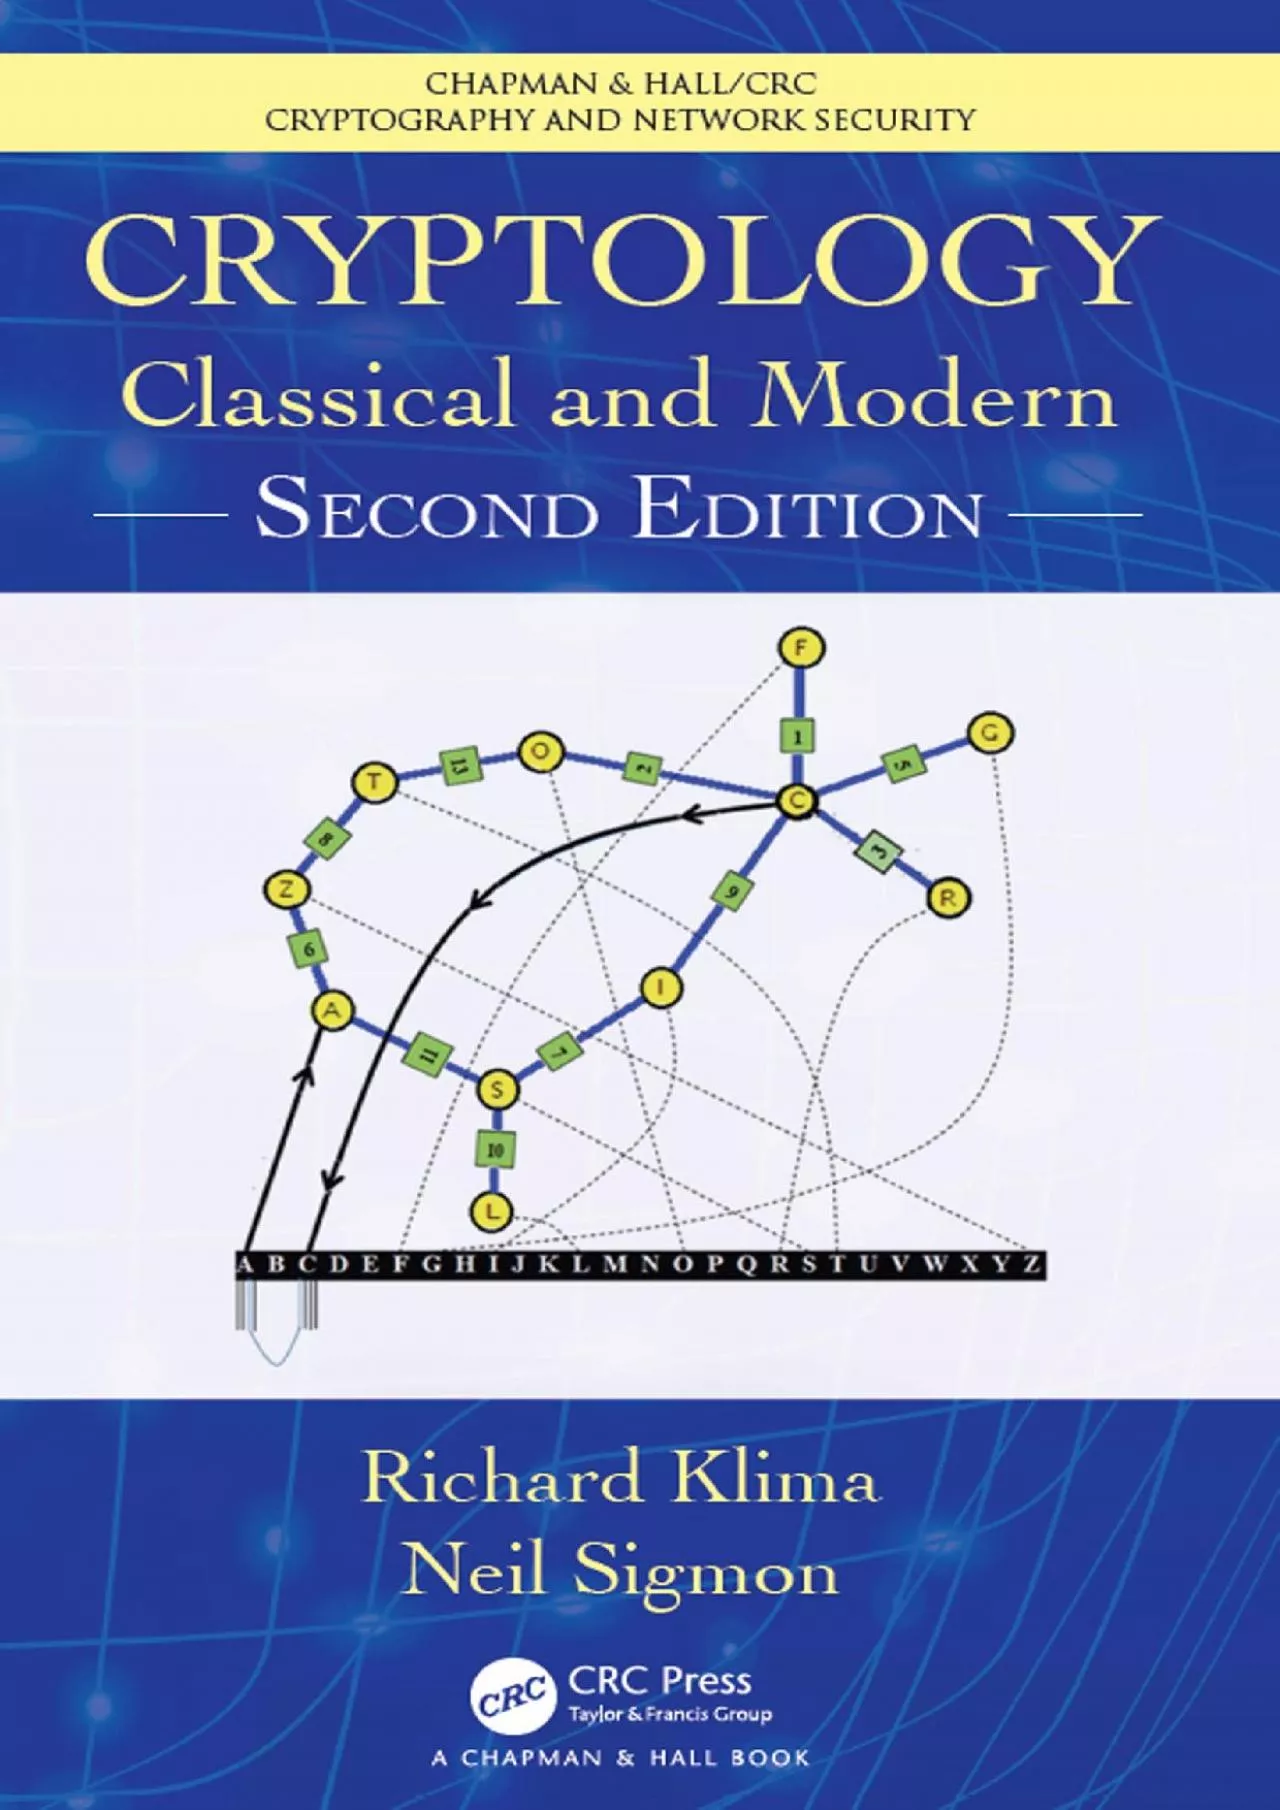 (BOOK)-Cryptology: Classical and Modern (Chapman  Hall/CRC Cryptography and Network Security